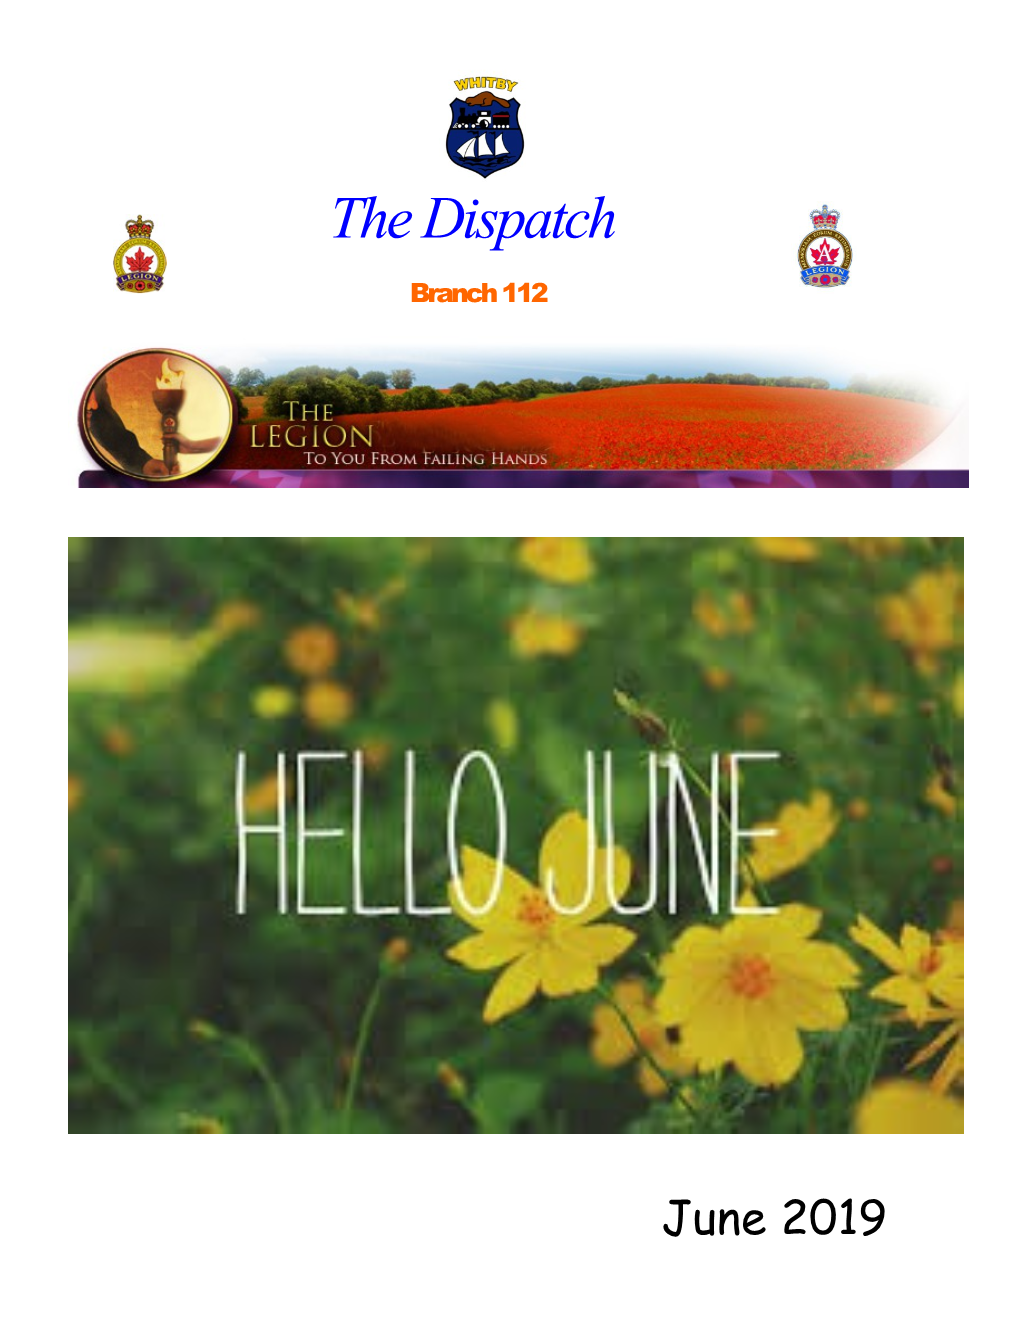 The Dispatch